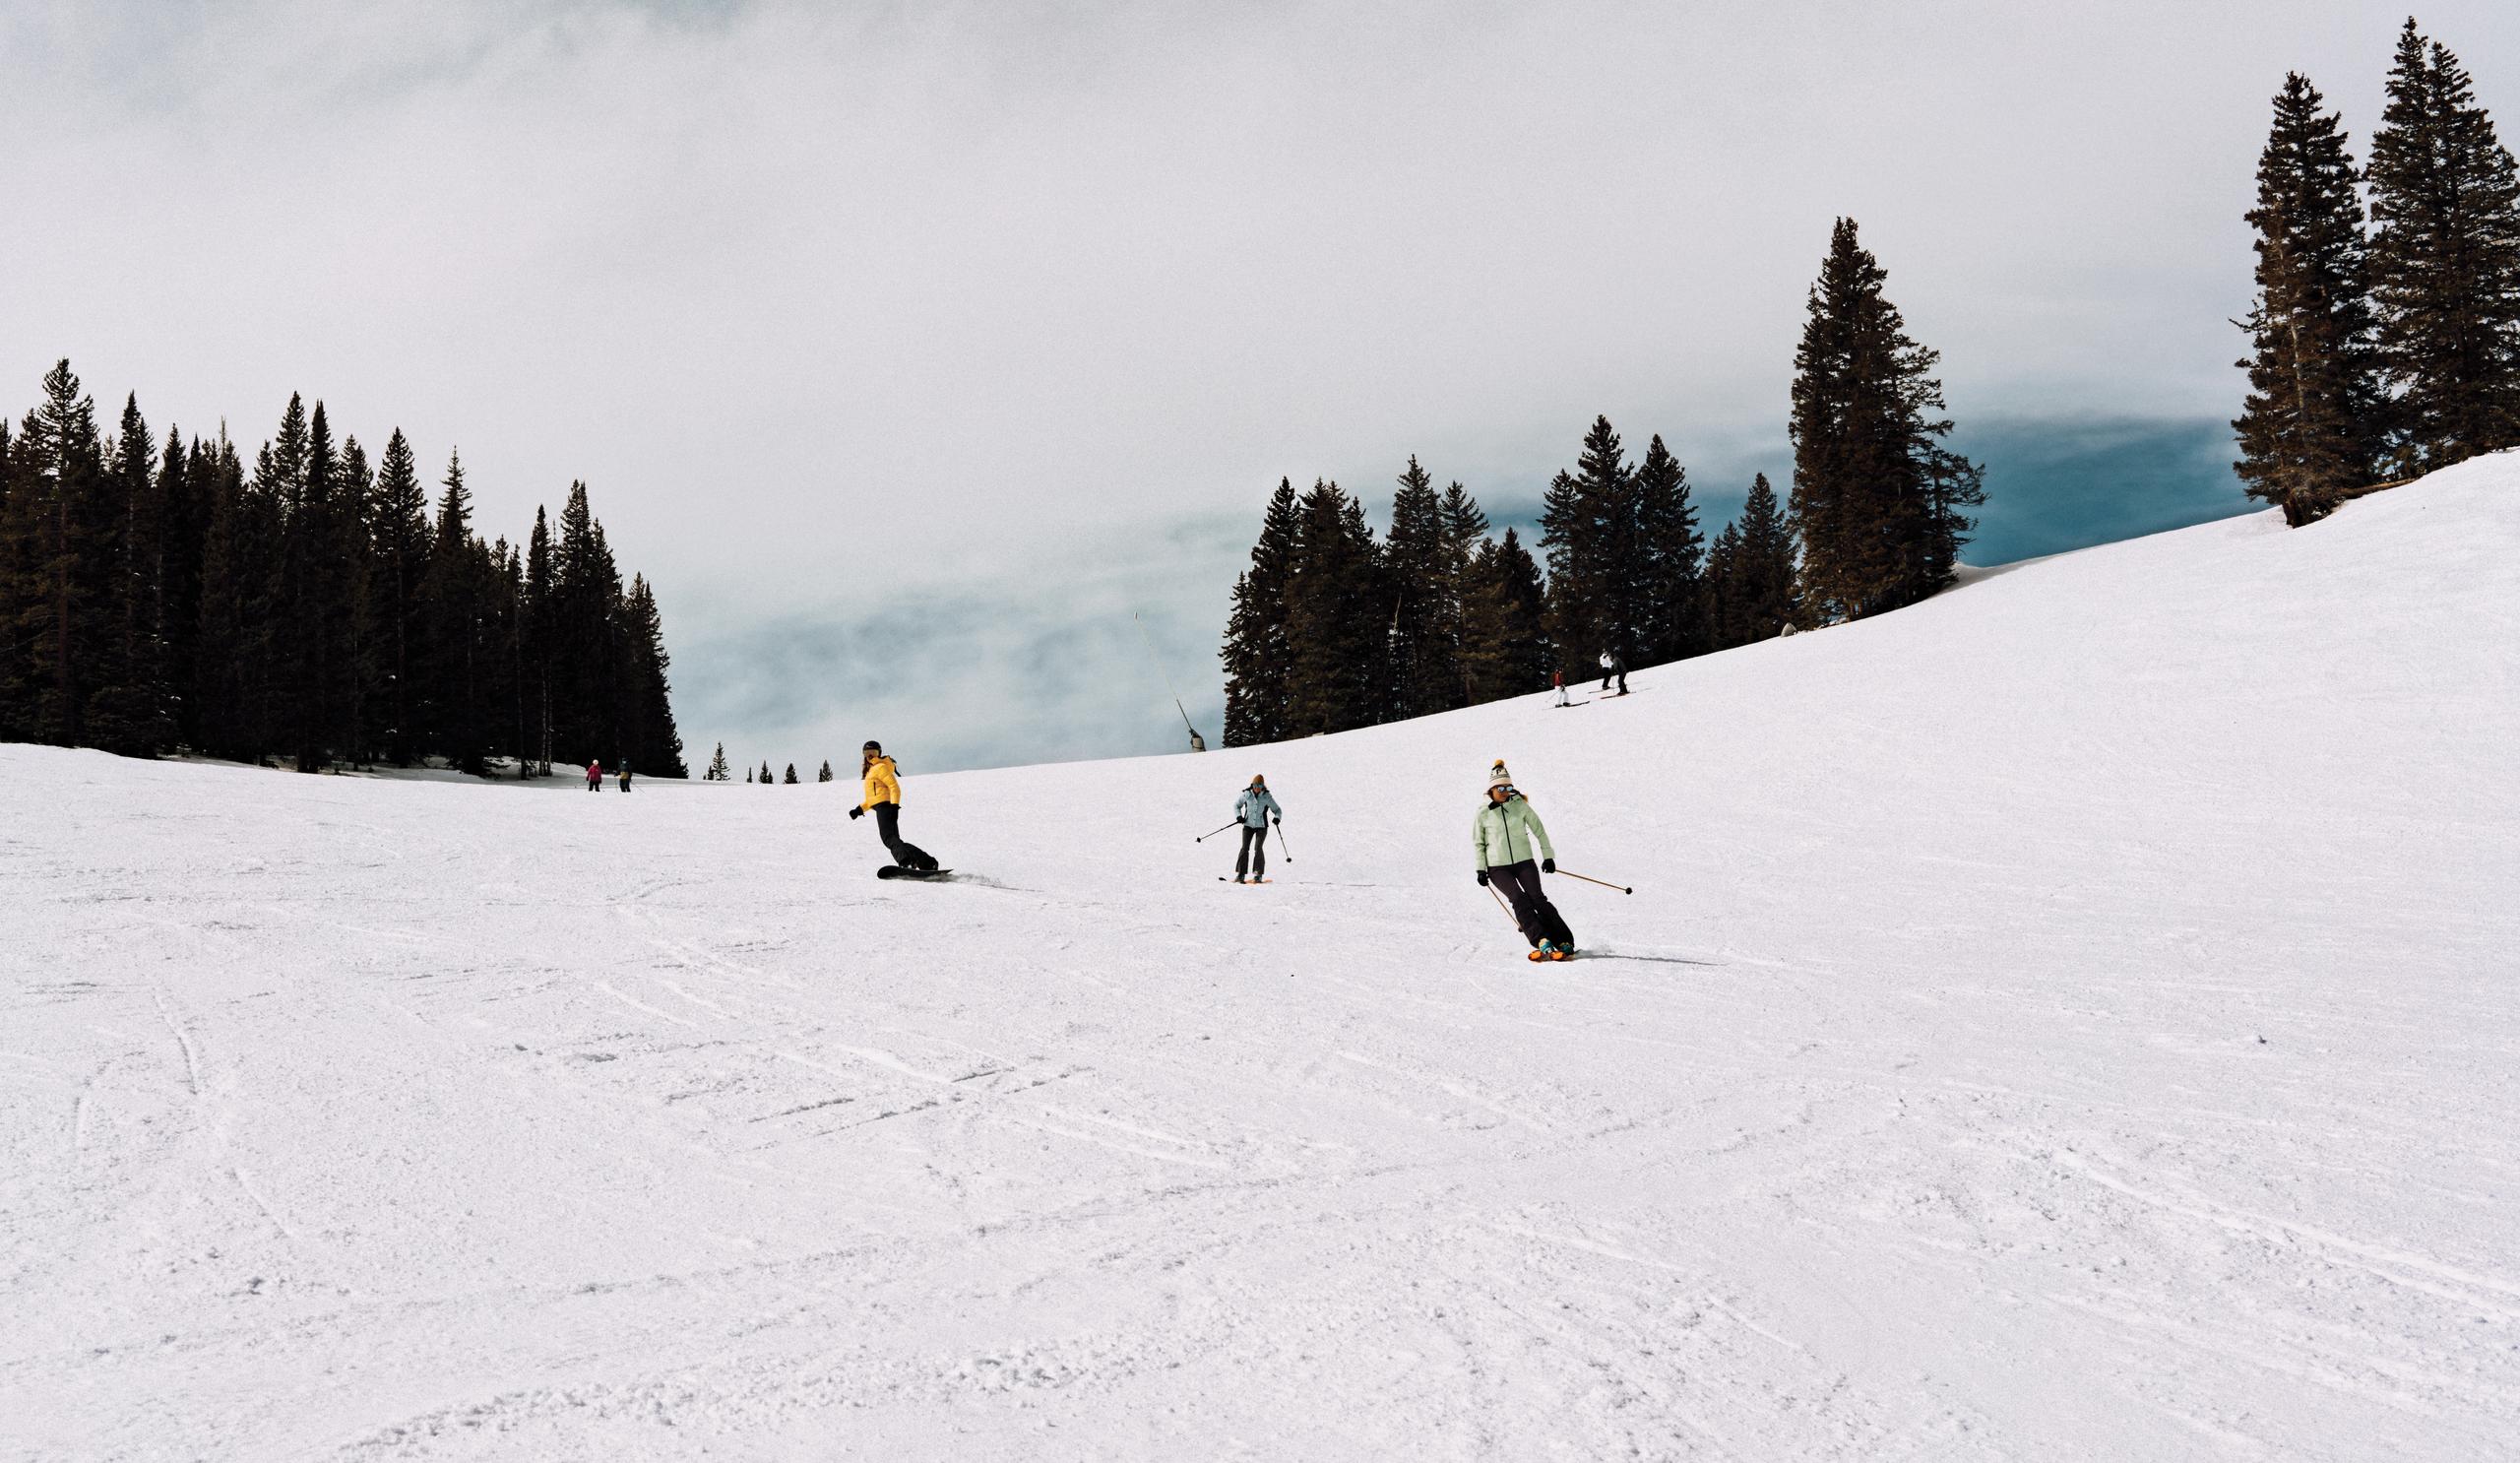 Two women skiing and one woman snowboarding down mountain in Aspen, Colorado